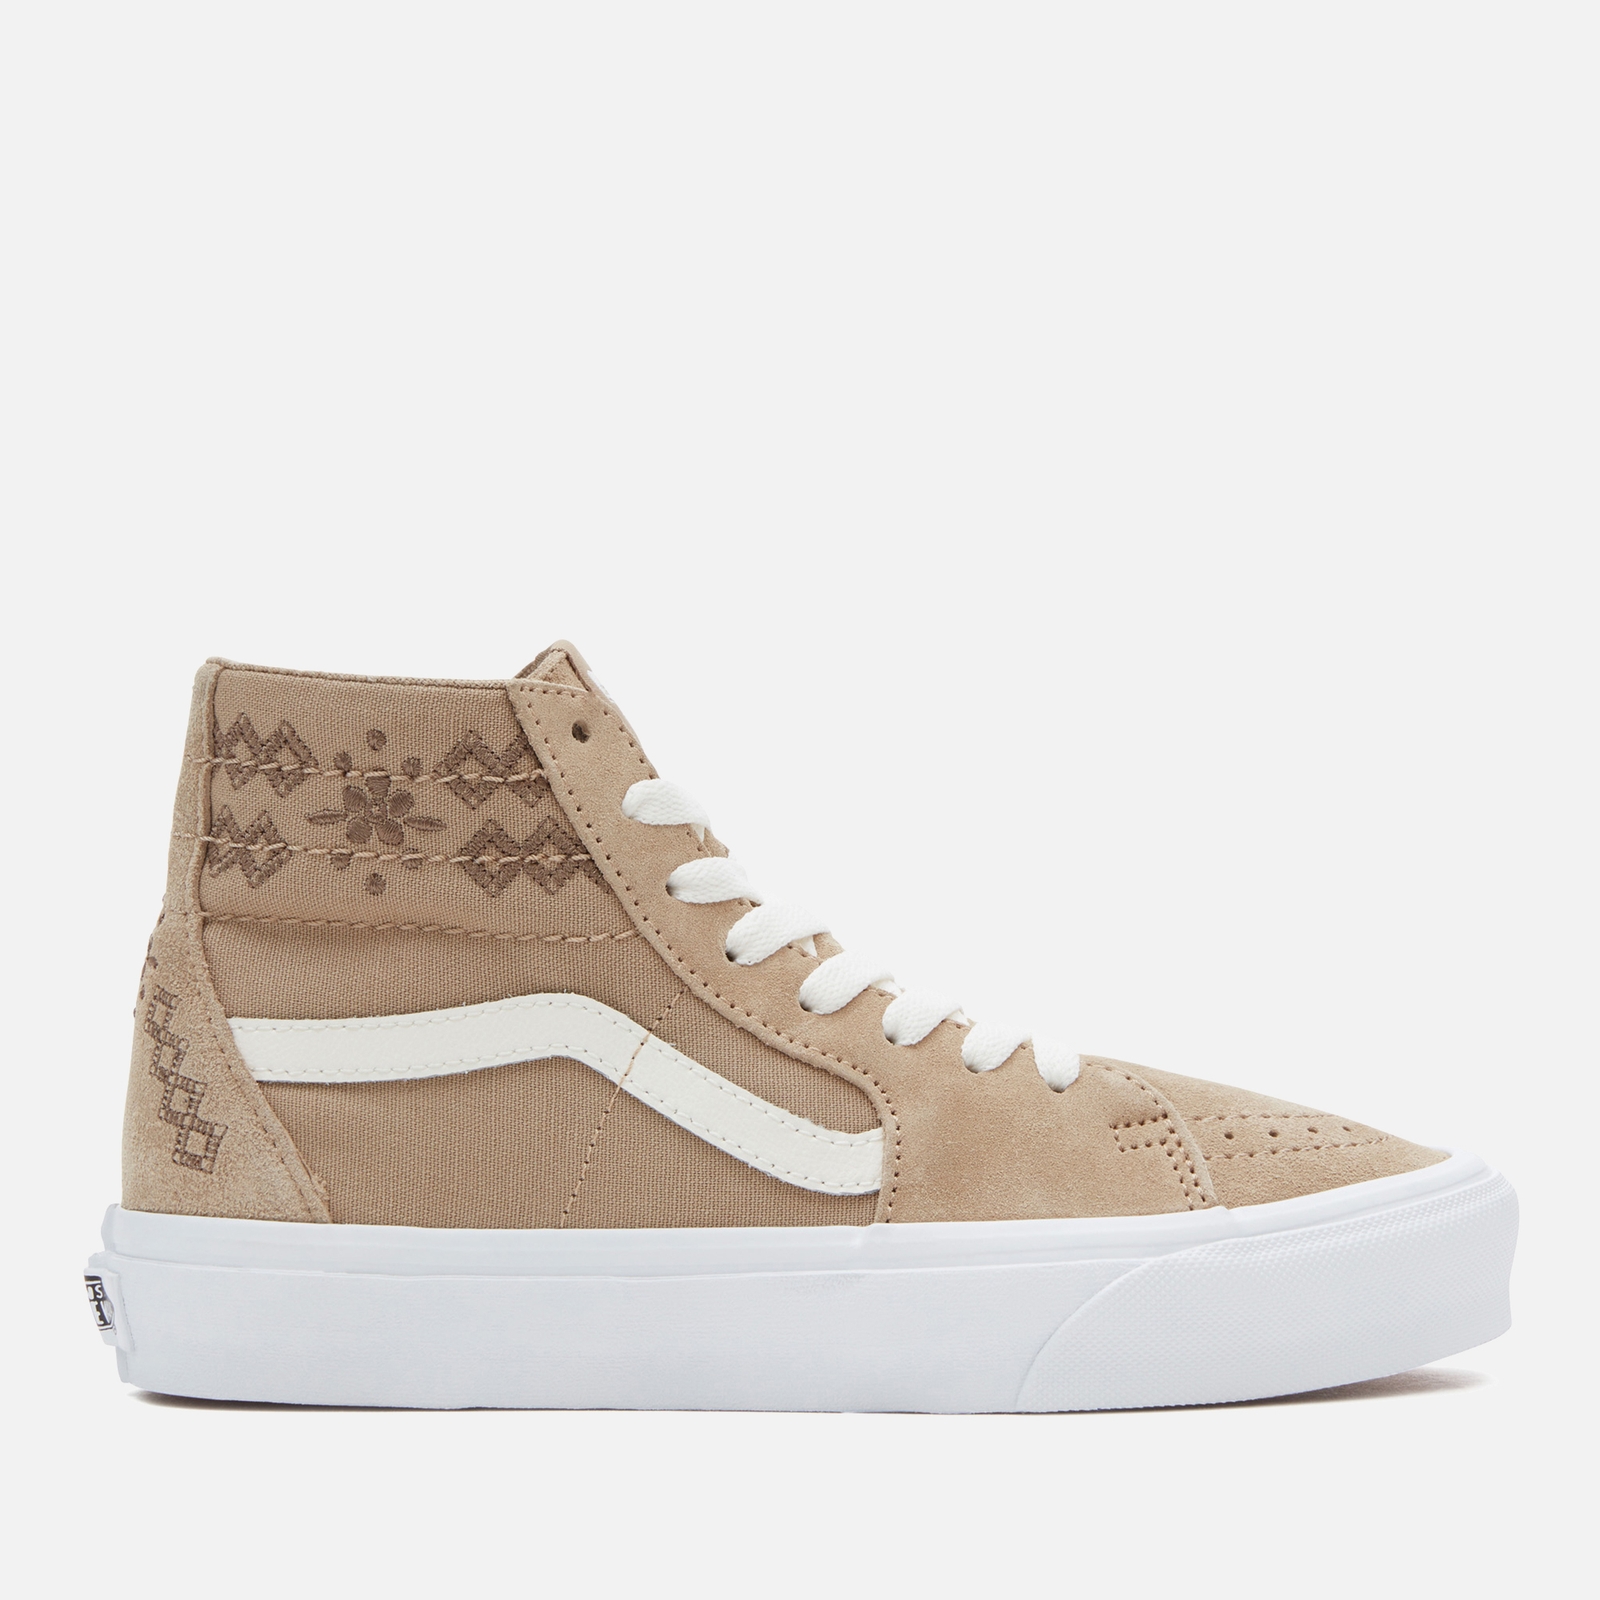 Vans Women’s SK8-Hi Tapered Canvas and Suede Trainers